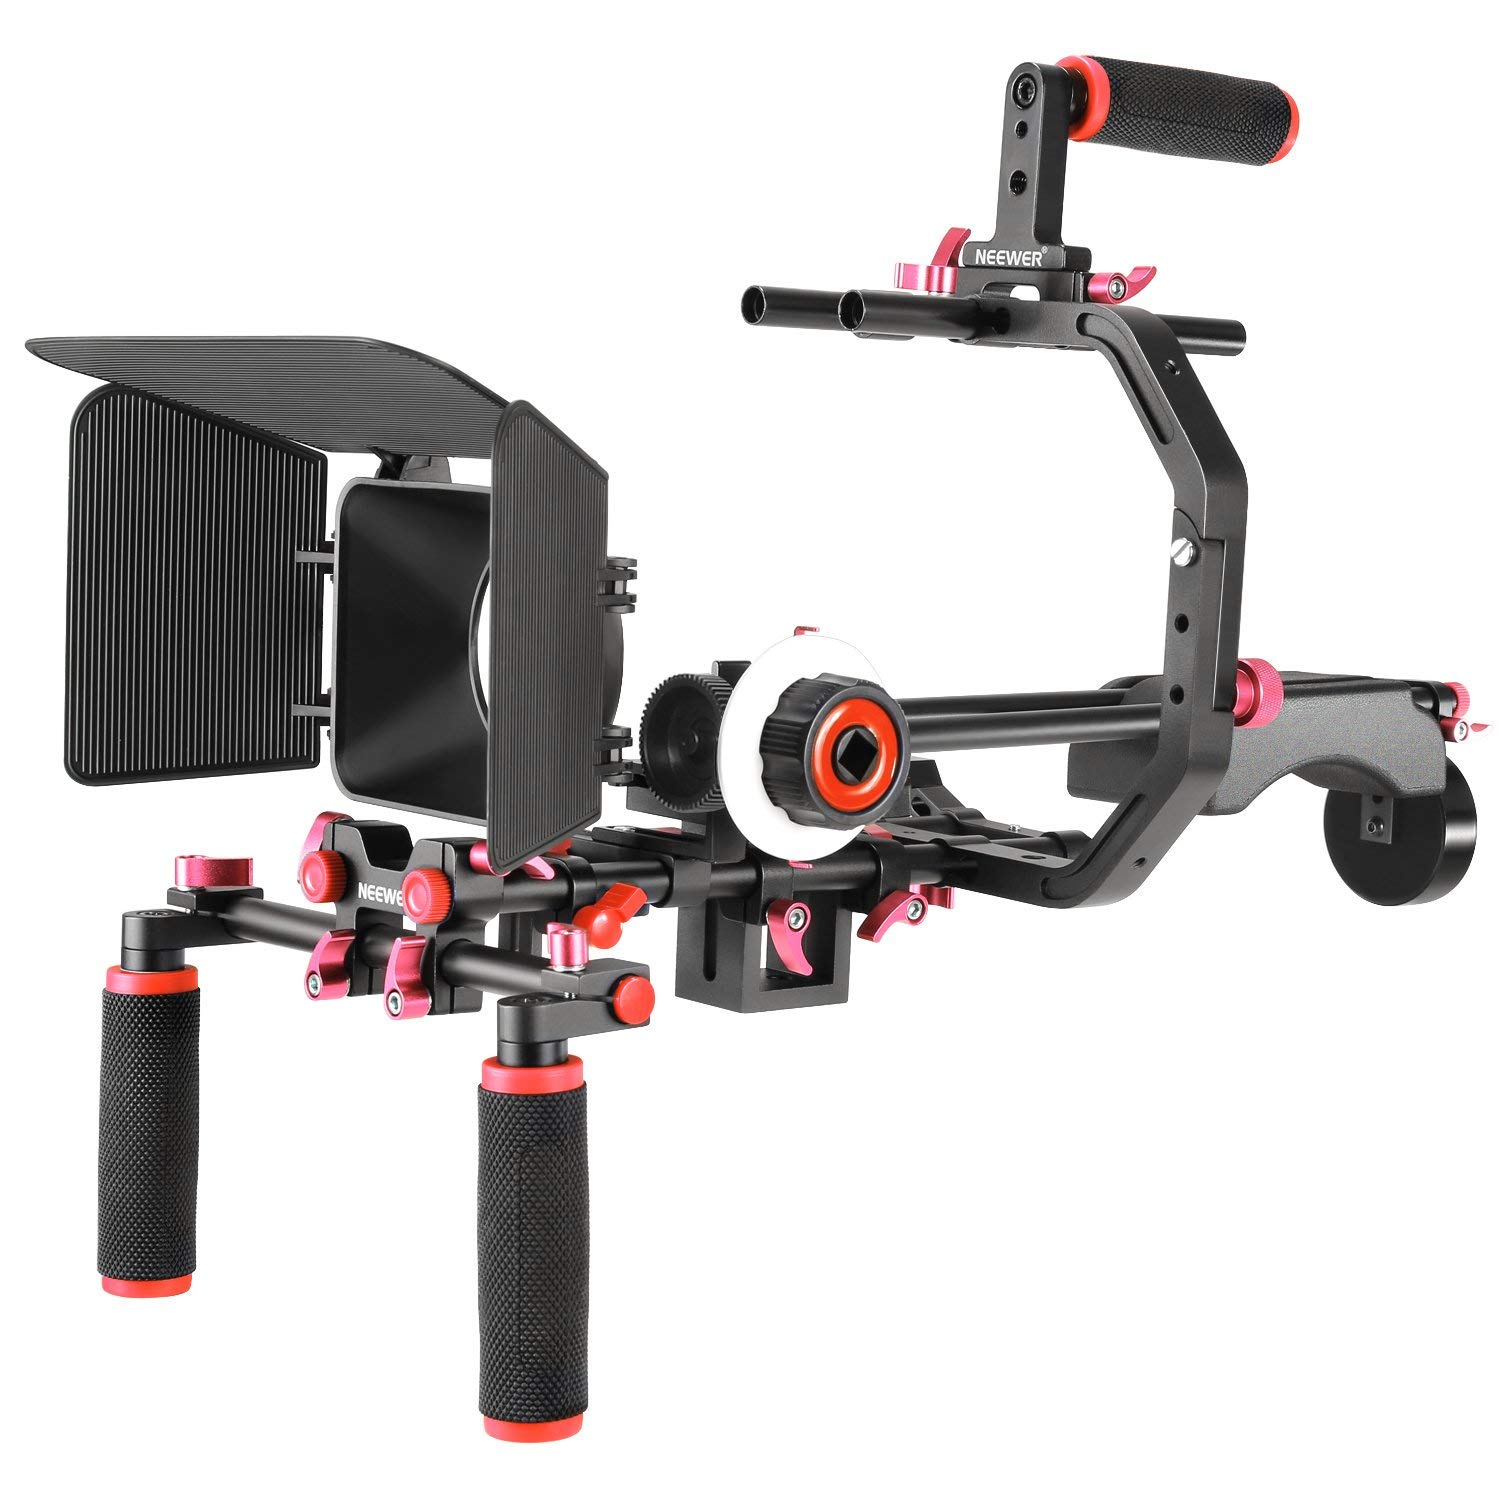 Neewer Video System Making Film Kit for Canon Nikon Sony and other digital reflex cameras Video Camcorders includes c-shaped Bracket handle 15 mm Rod Matte Box Follow Focus Shoulder Rig Red plus Black